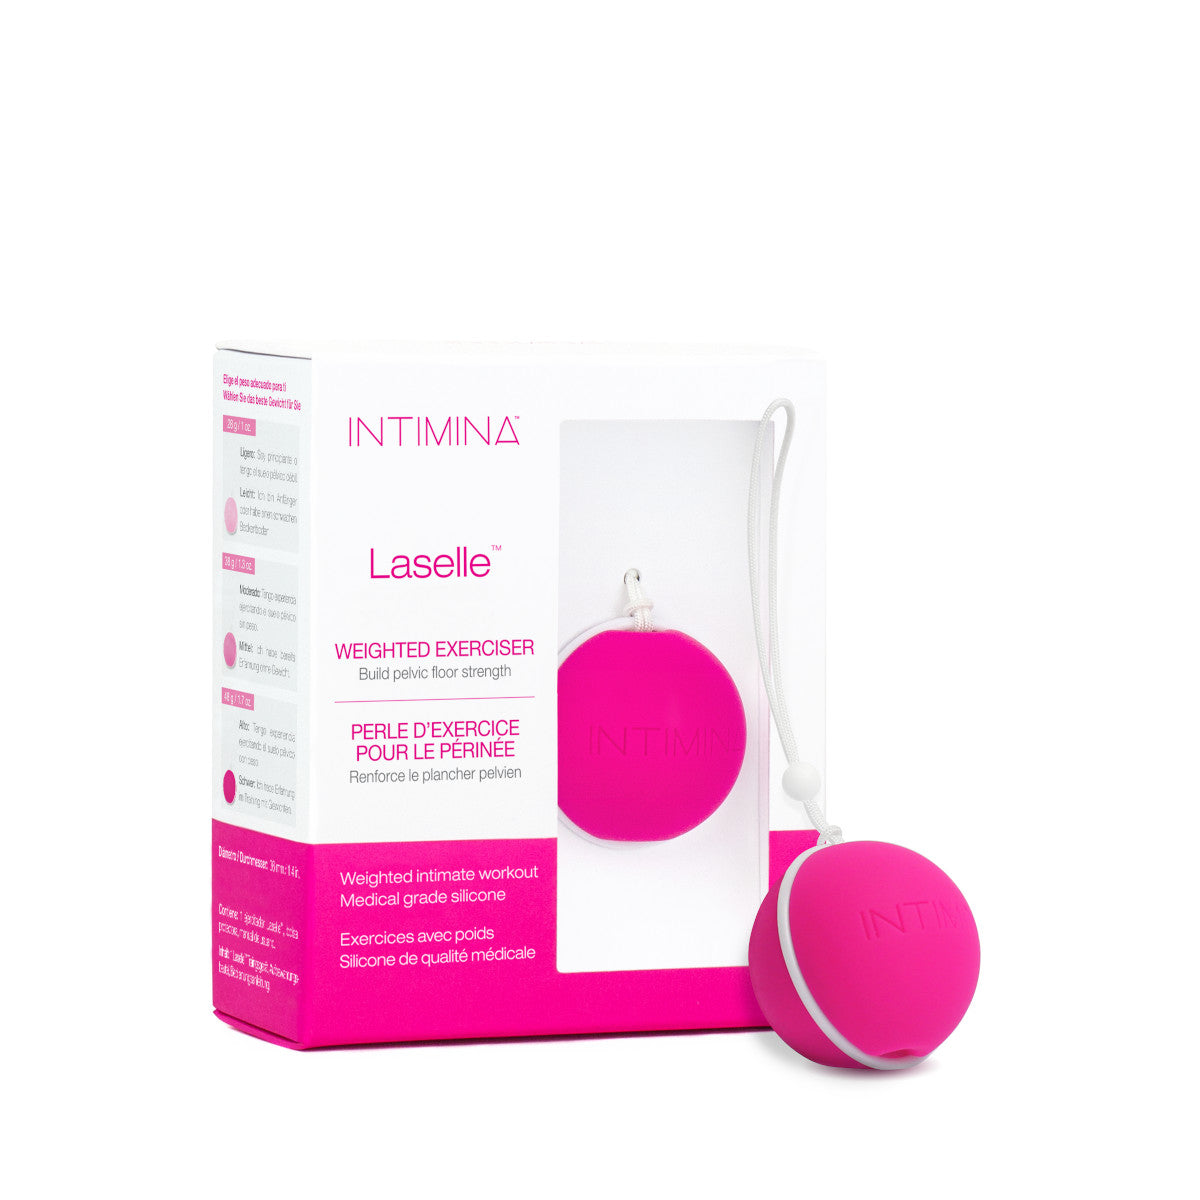 Intimina Laselle Exerciser 48g Advanced Weighted Ball for Experts Intimates Adult Boutique